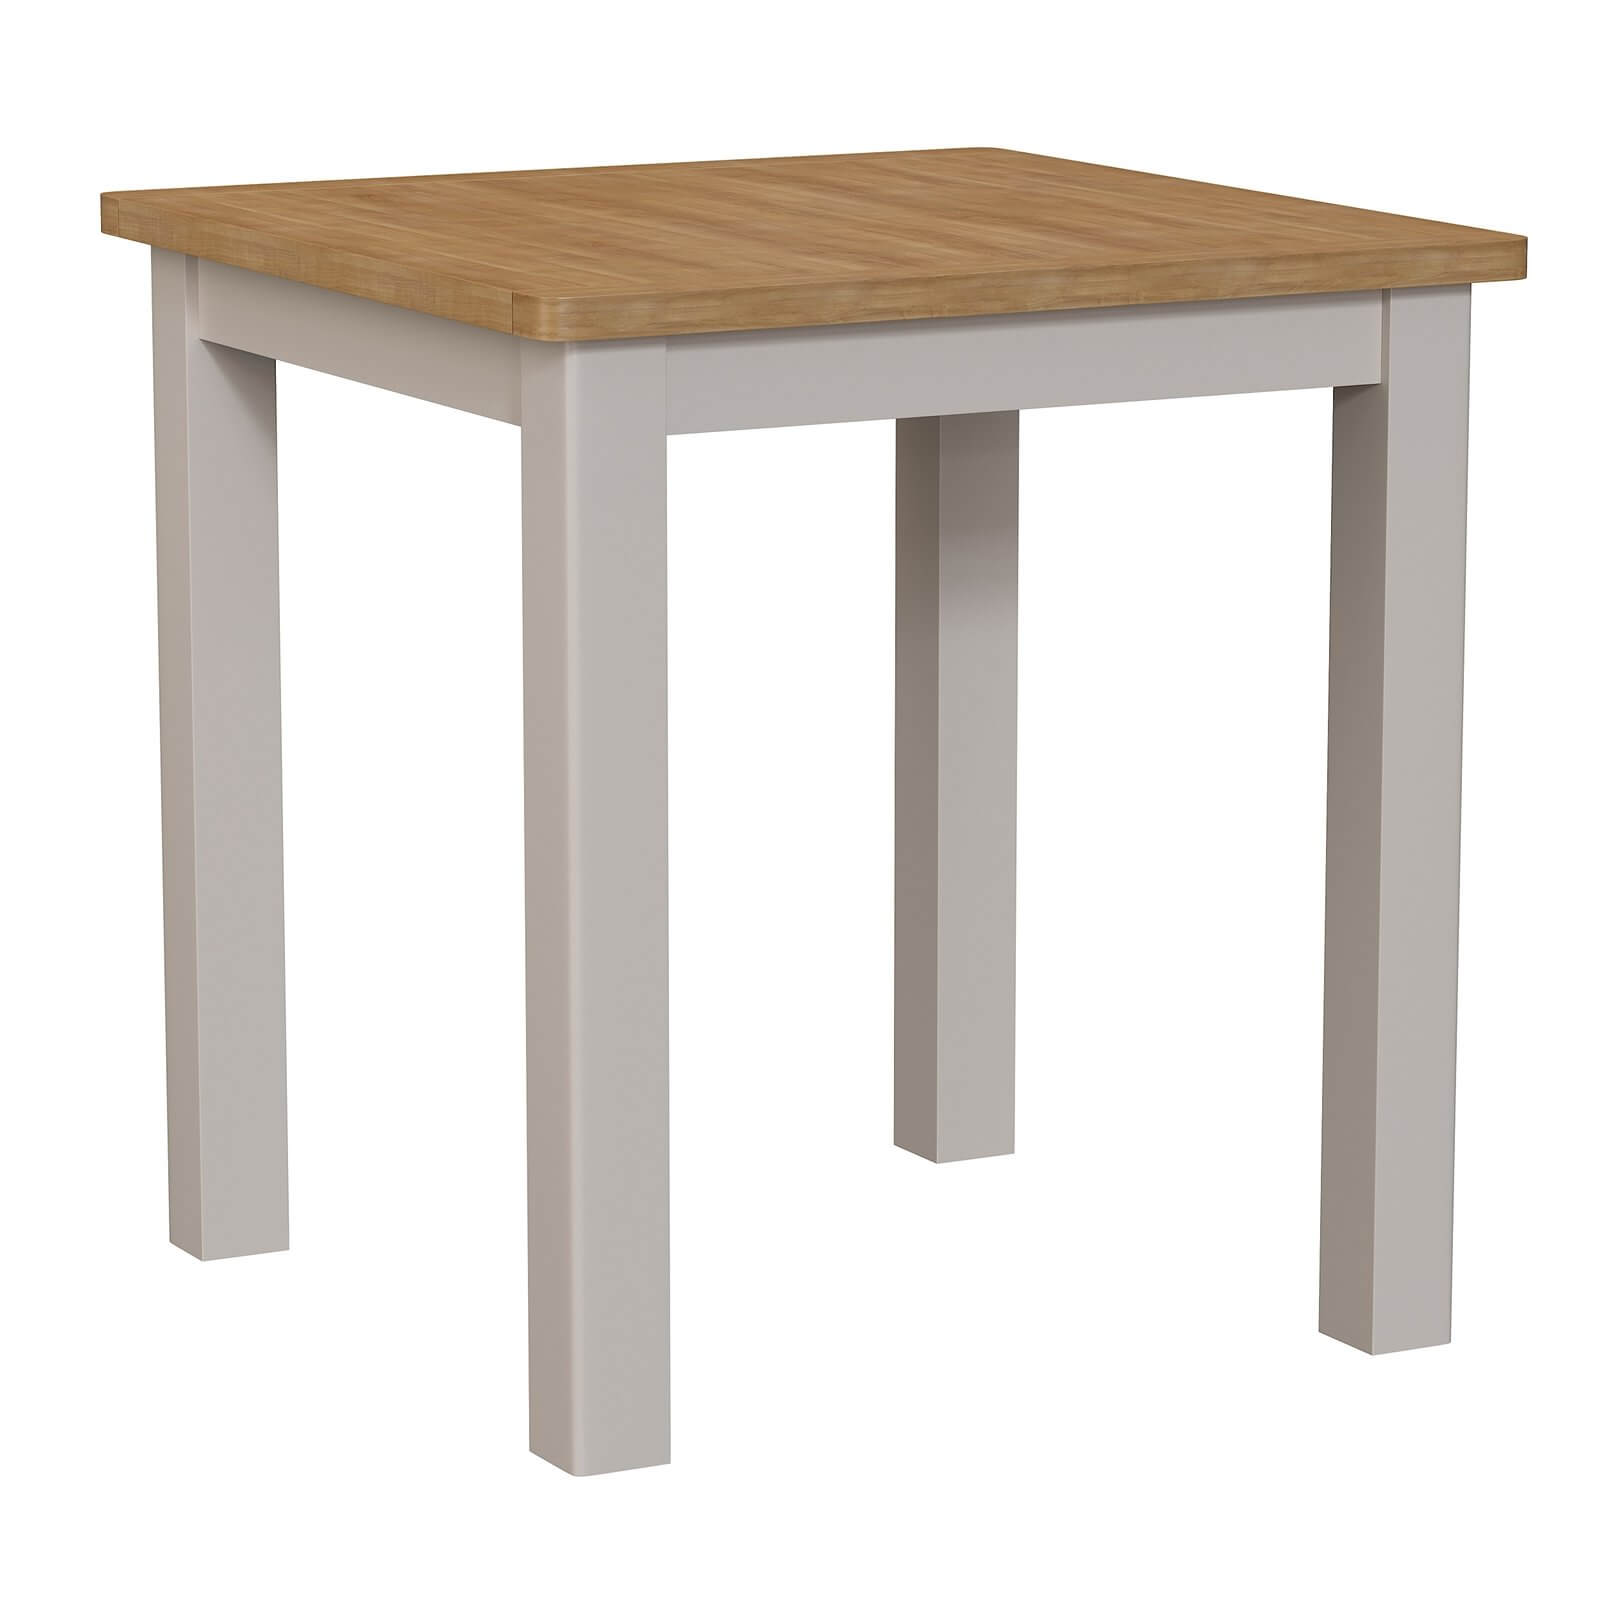 Padstow Dining Table - Truffle